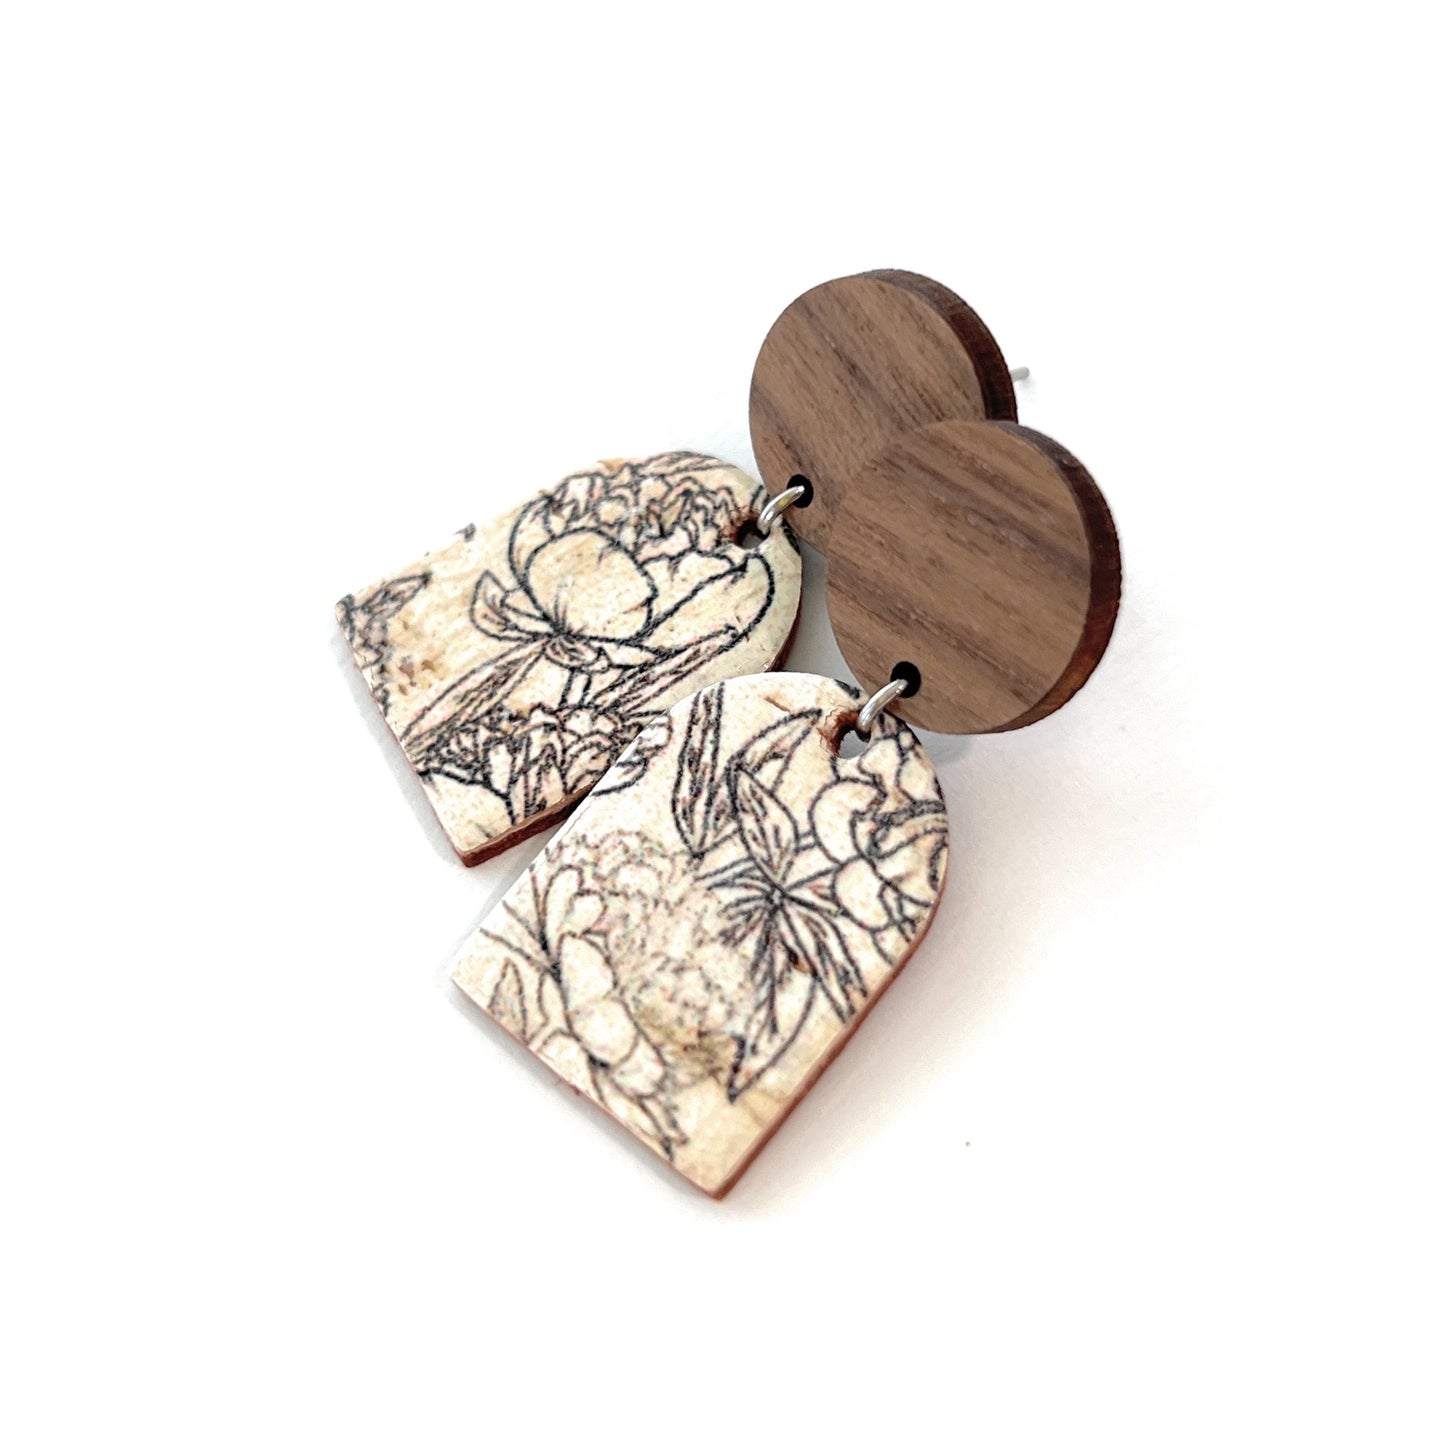 THE ARCH DANGLE in Black & White Floral Sketch/ Lightweight Leather + Wood Statement Earrings